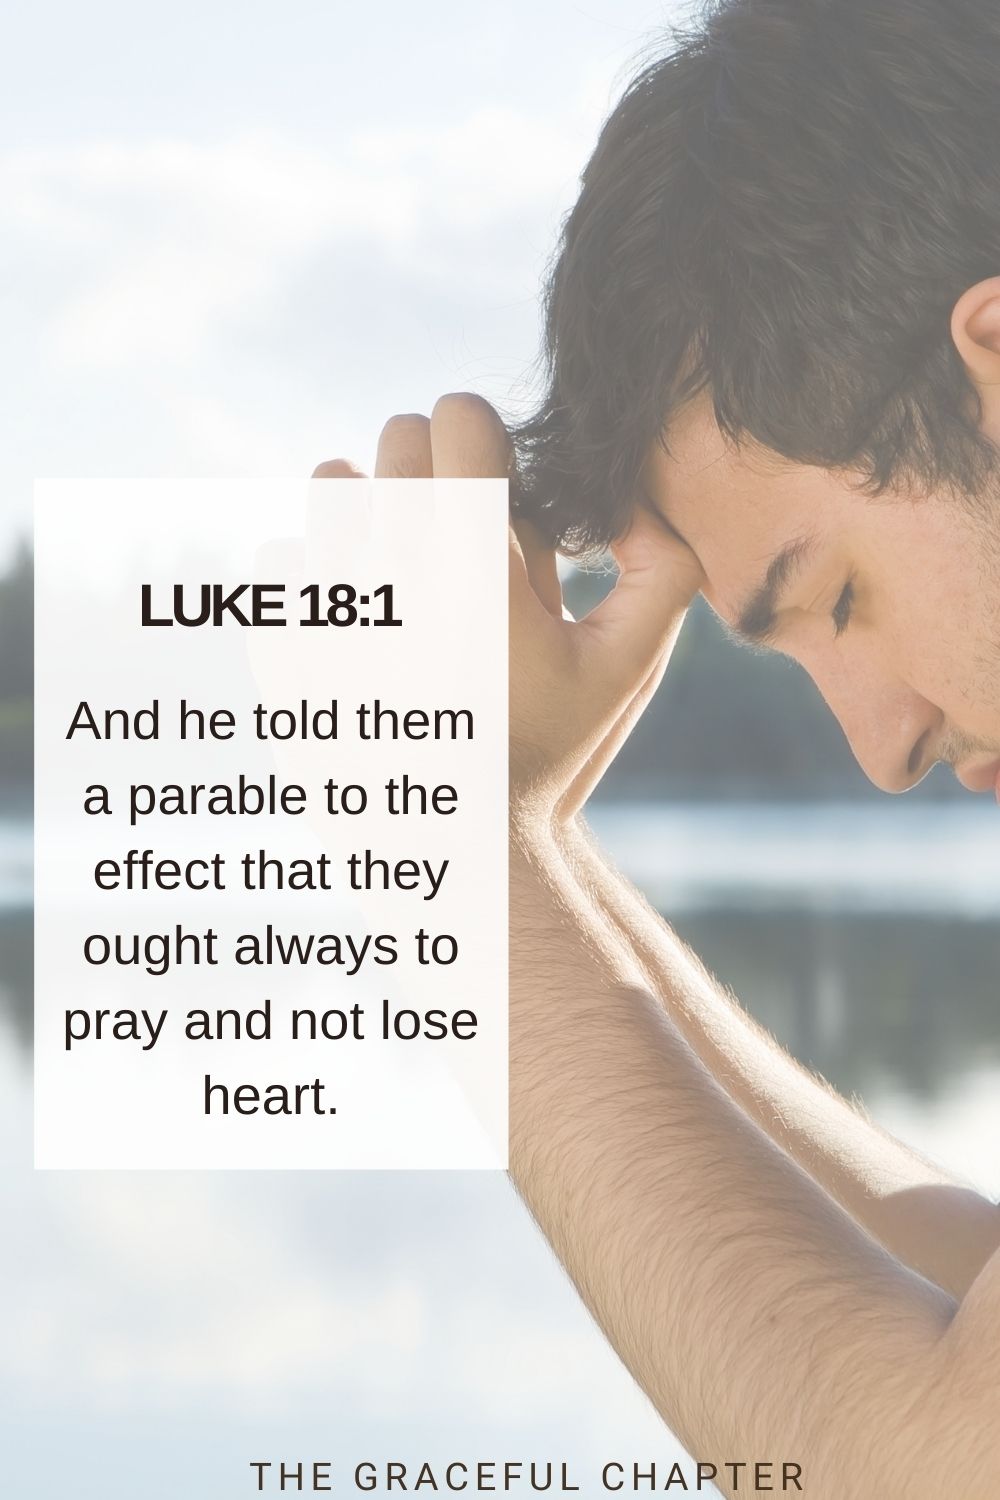 And he told them a parable to the effect that they ought always to pray and not lose heart. Luke 18:1